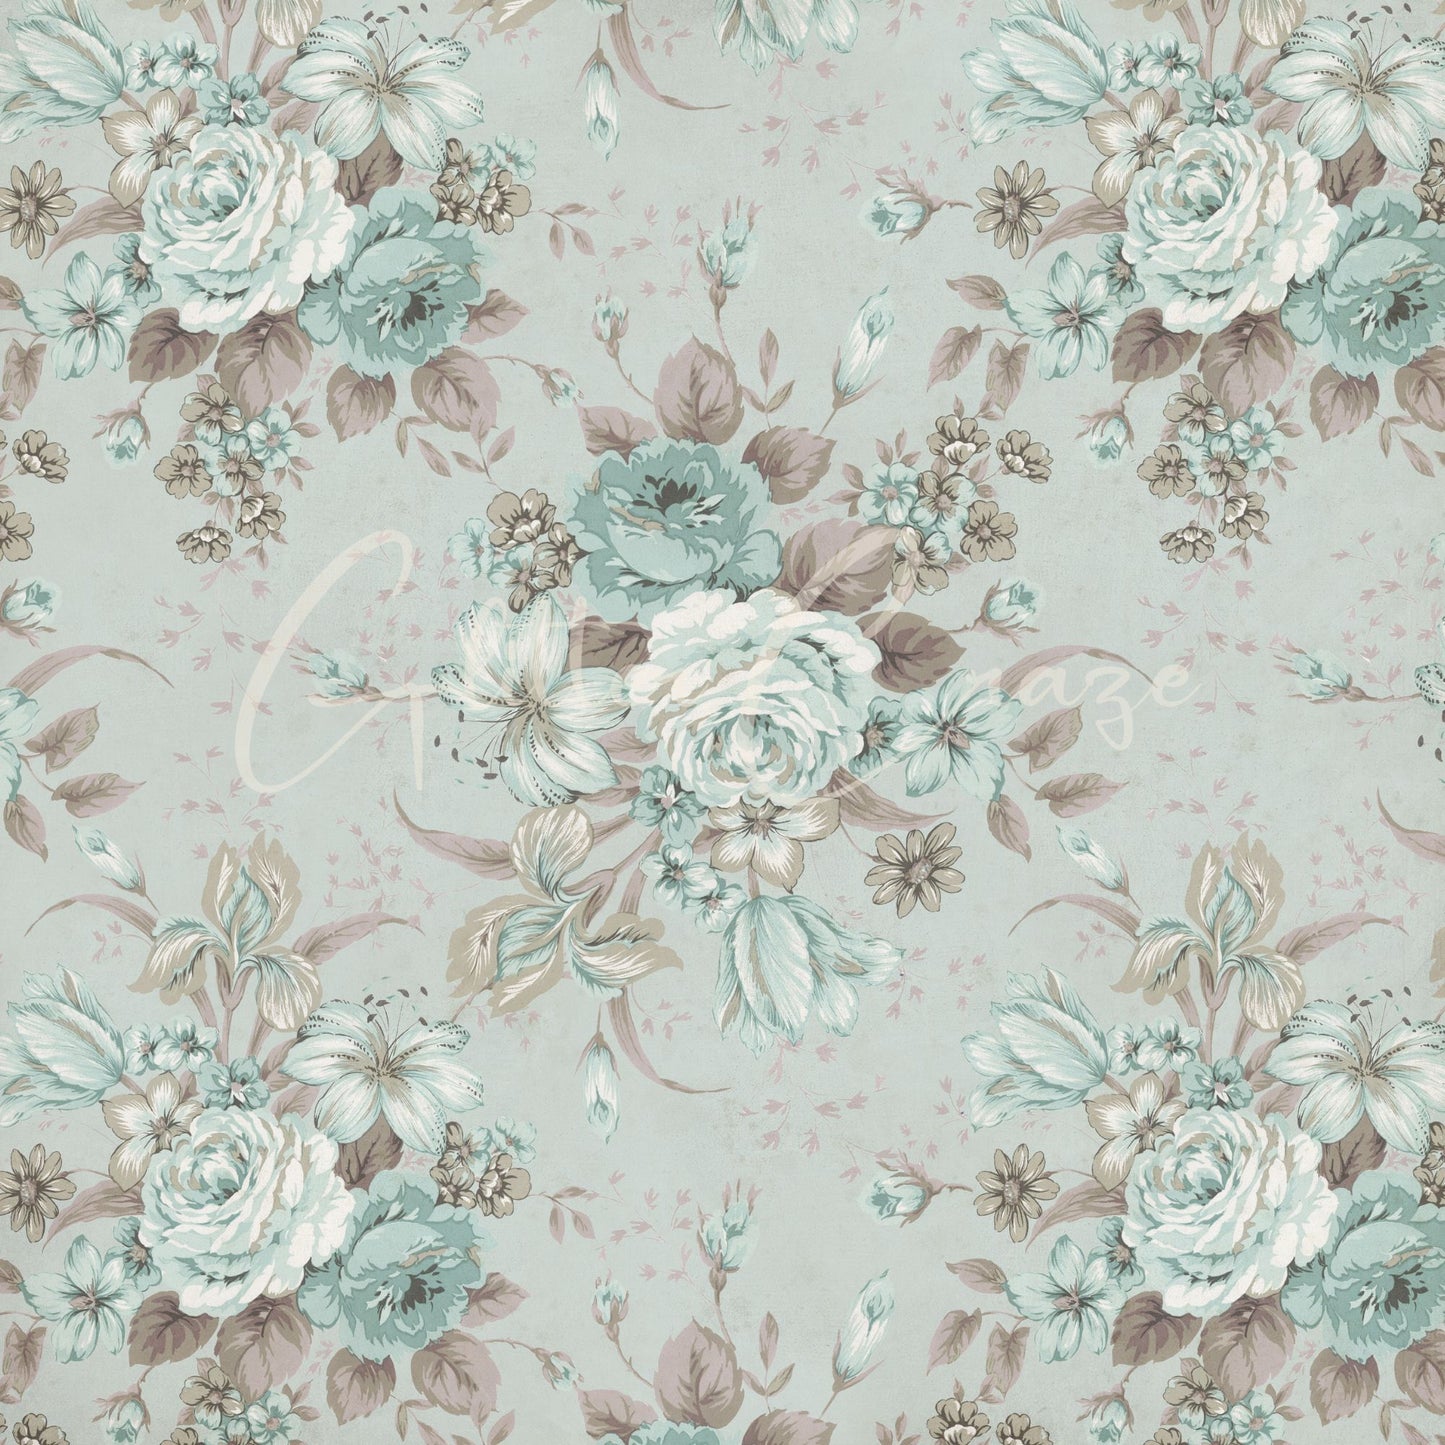 Victorian Floral collection- 12x12 vinyl sheets- 12 designs available